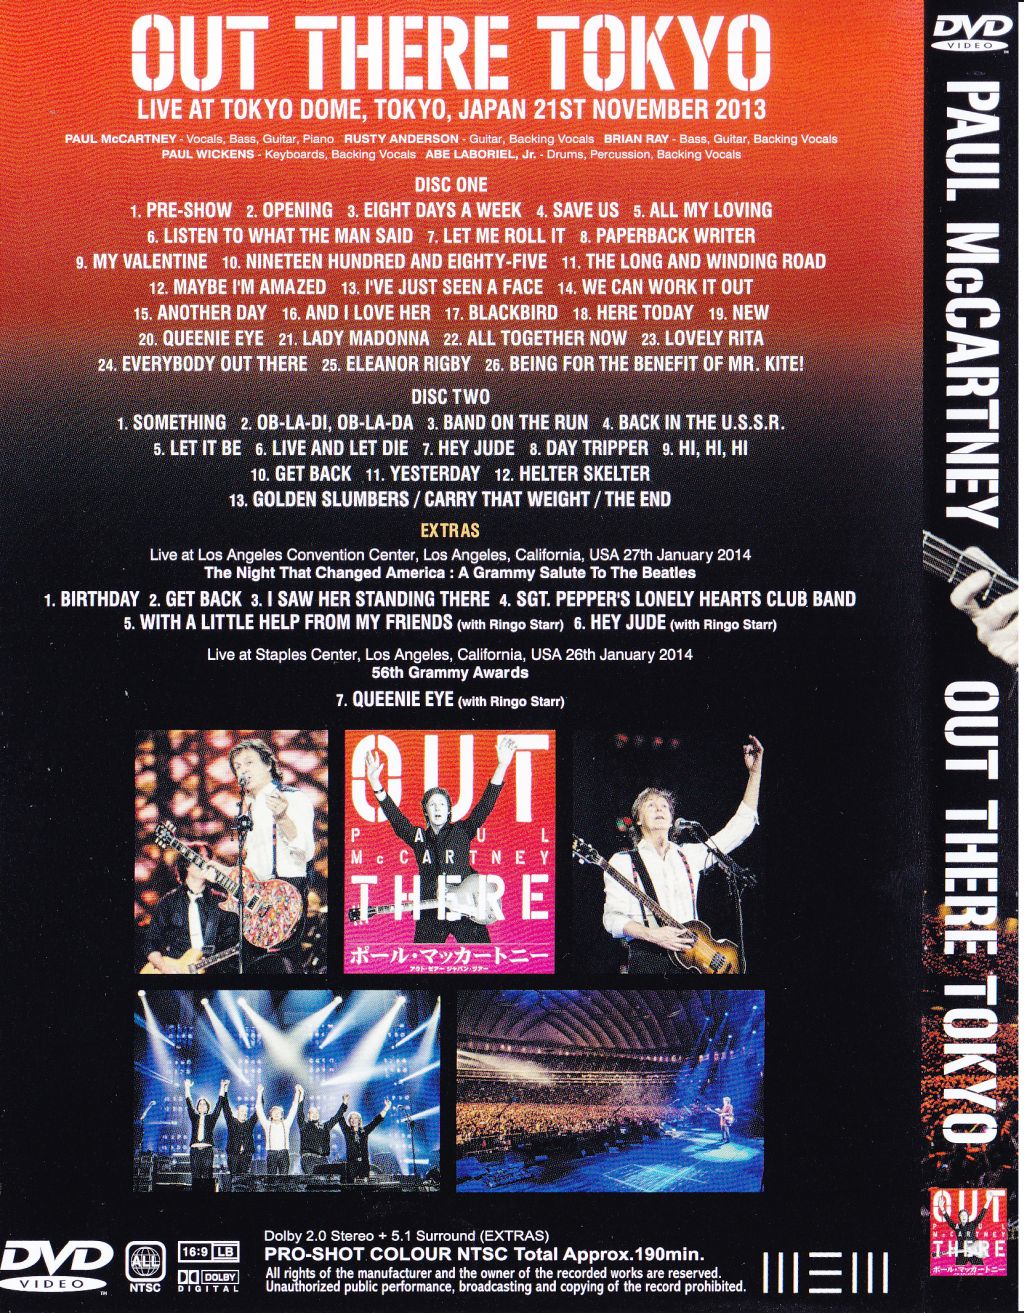 Paul McCartney / Out There Tokyo / 2DVD – GiGinJapan